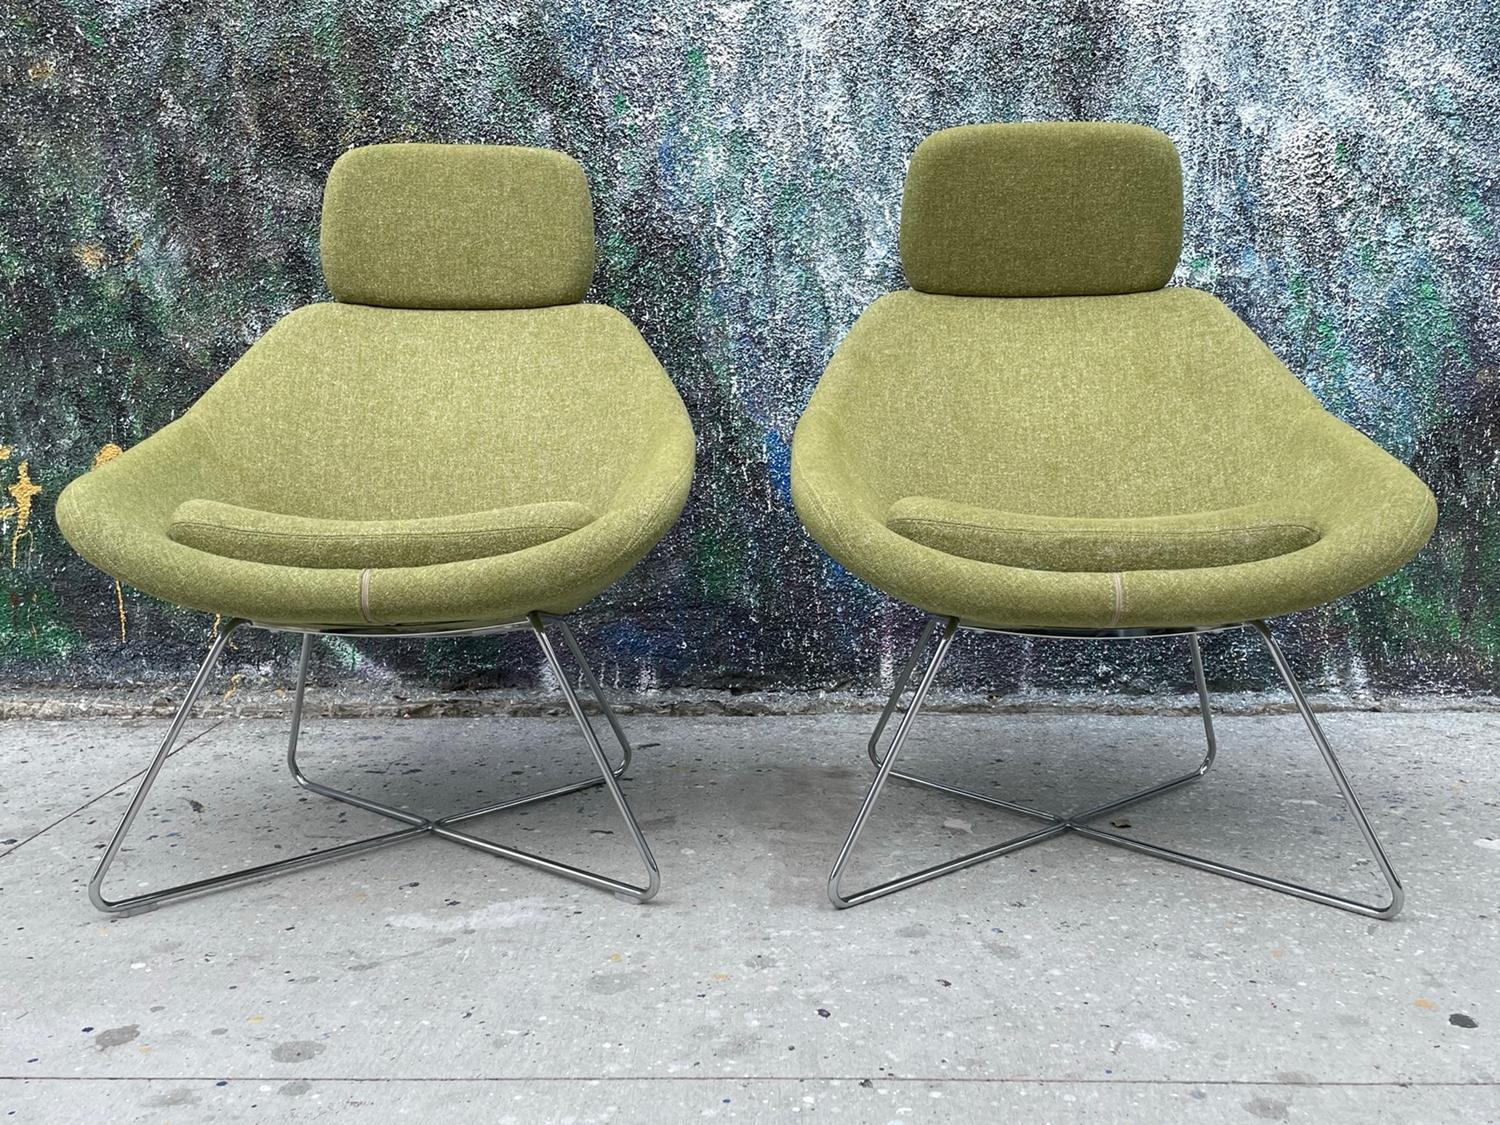 North American Pair of Open Lounge Chairs by Pearson Lloyd for Allermuir